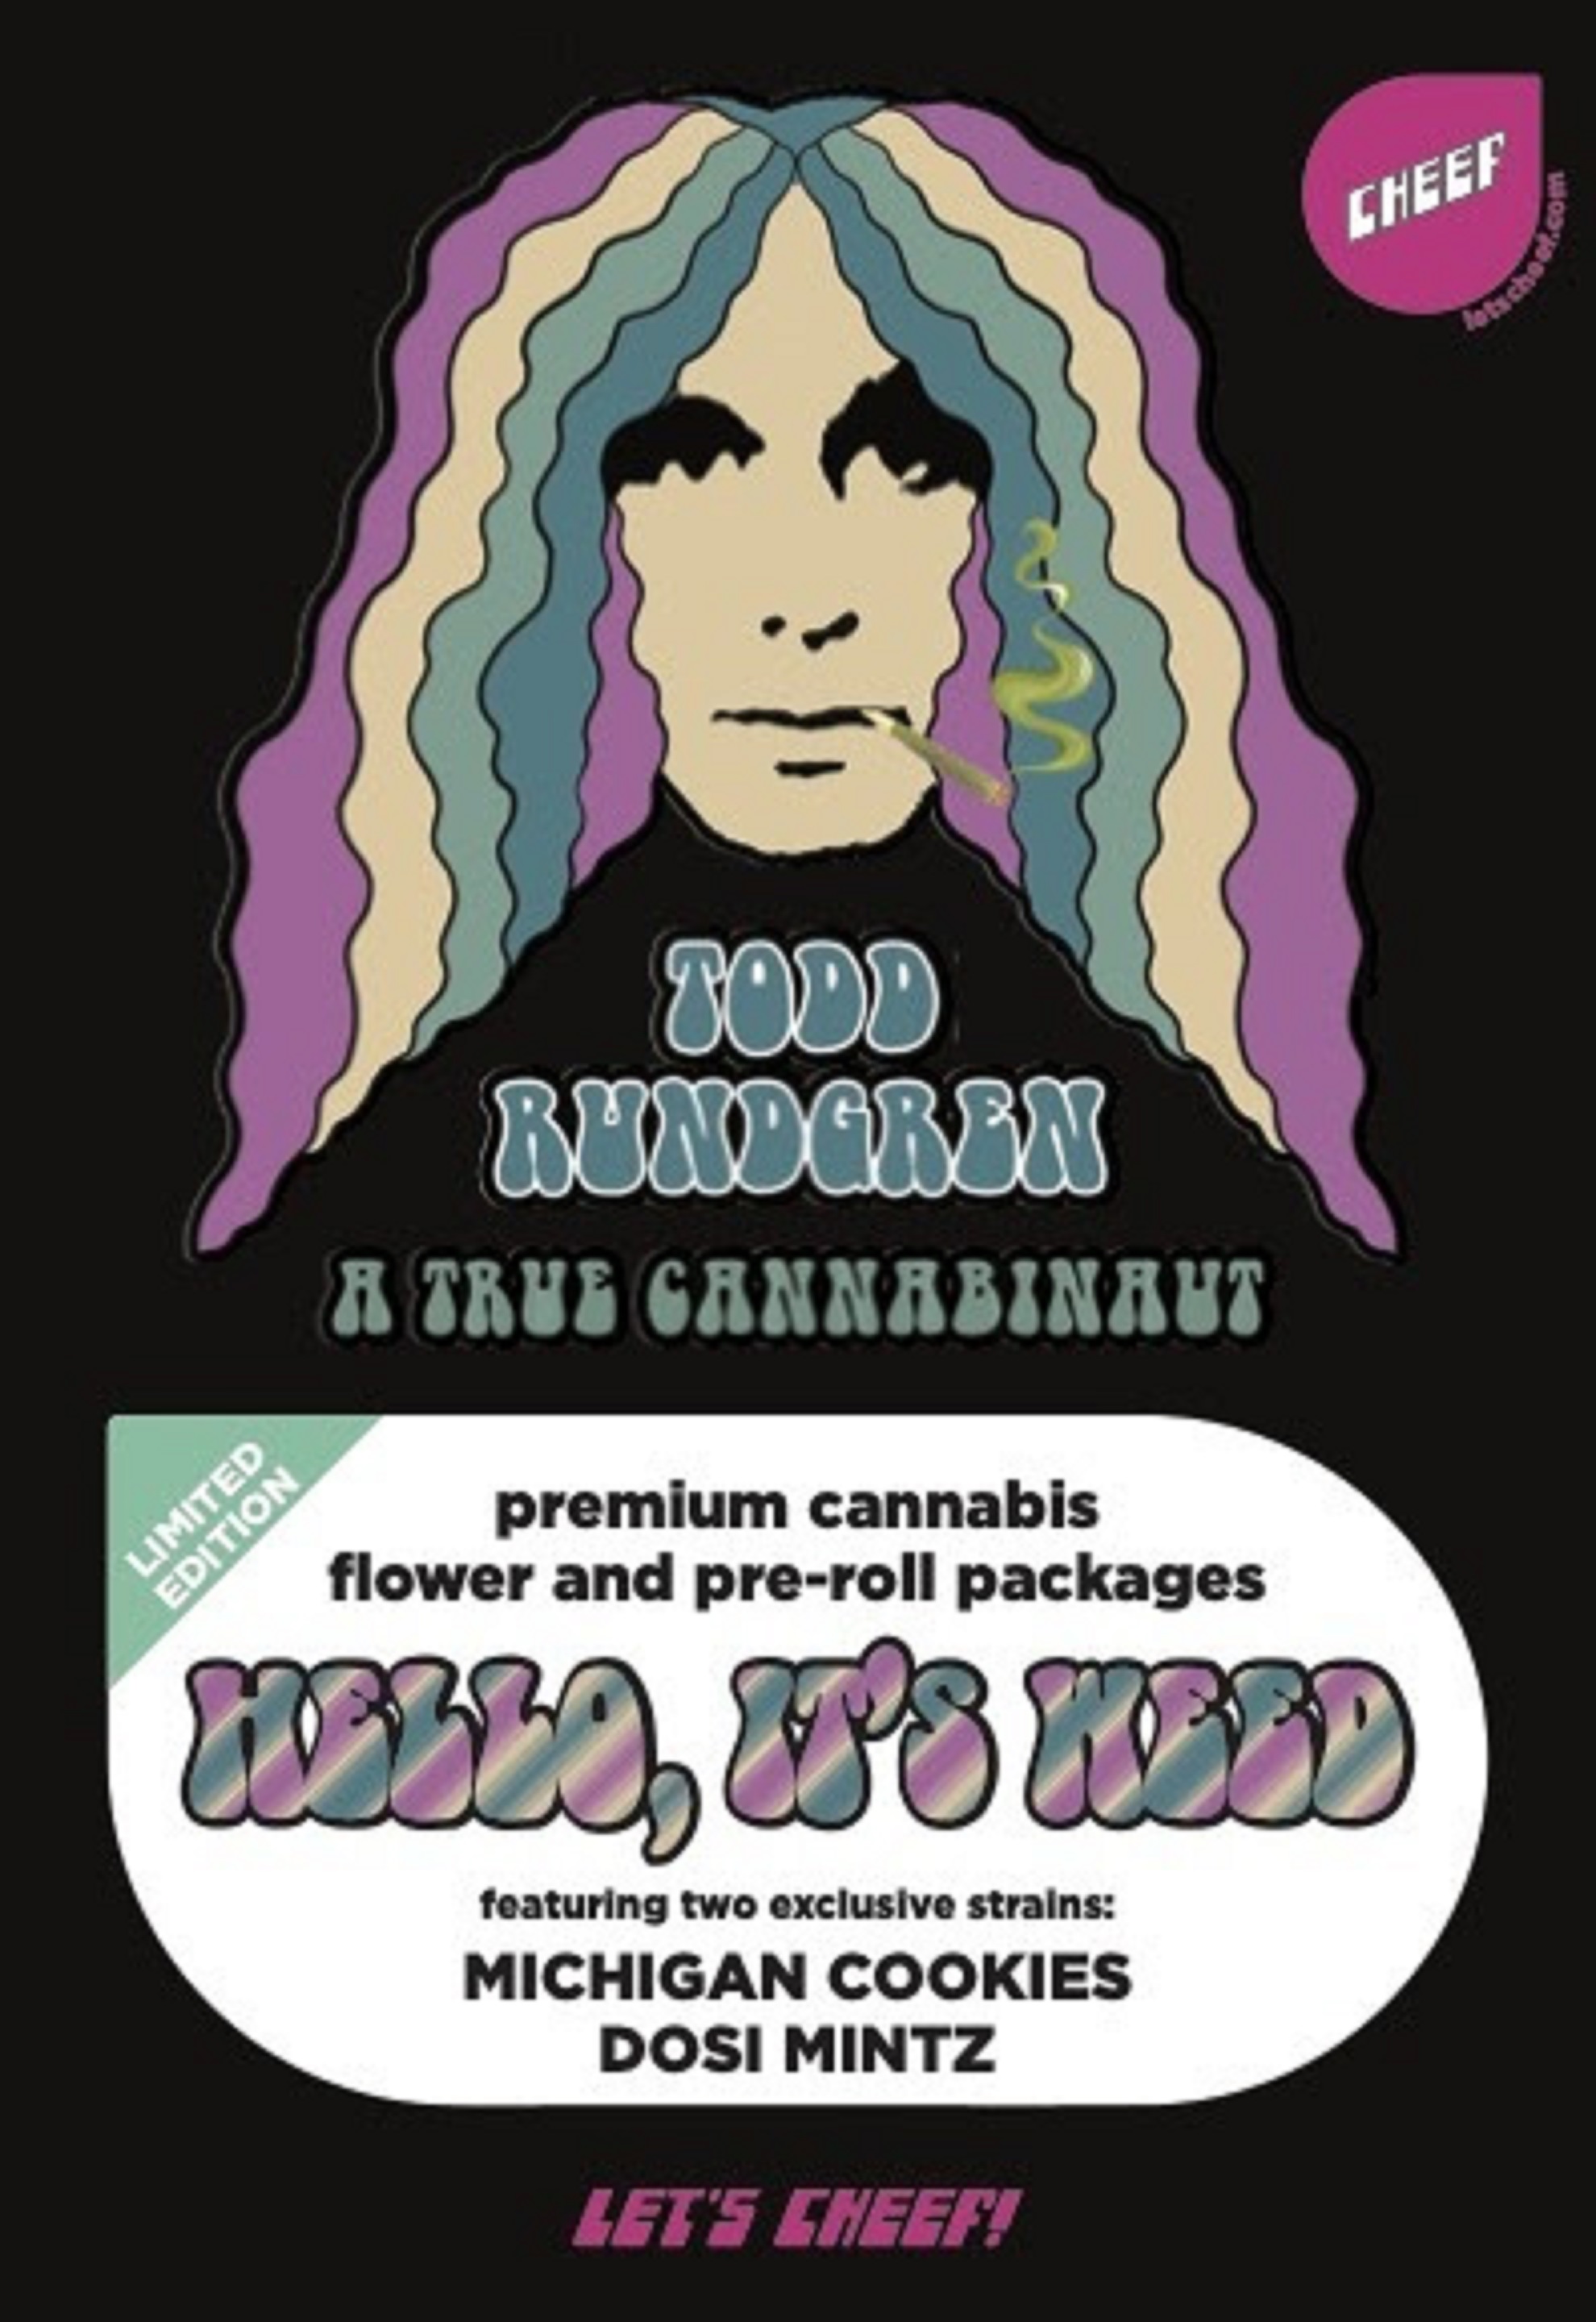 "Hello, It's Weed": Todd Rundgren teams with Cheef Cannabis on limited-edition official strains